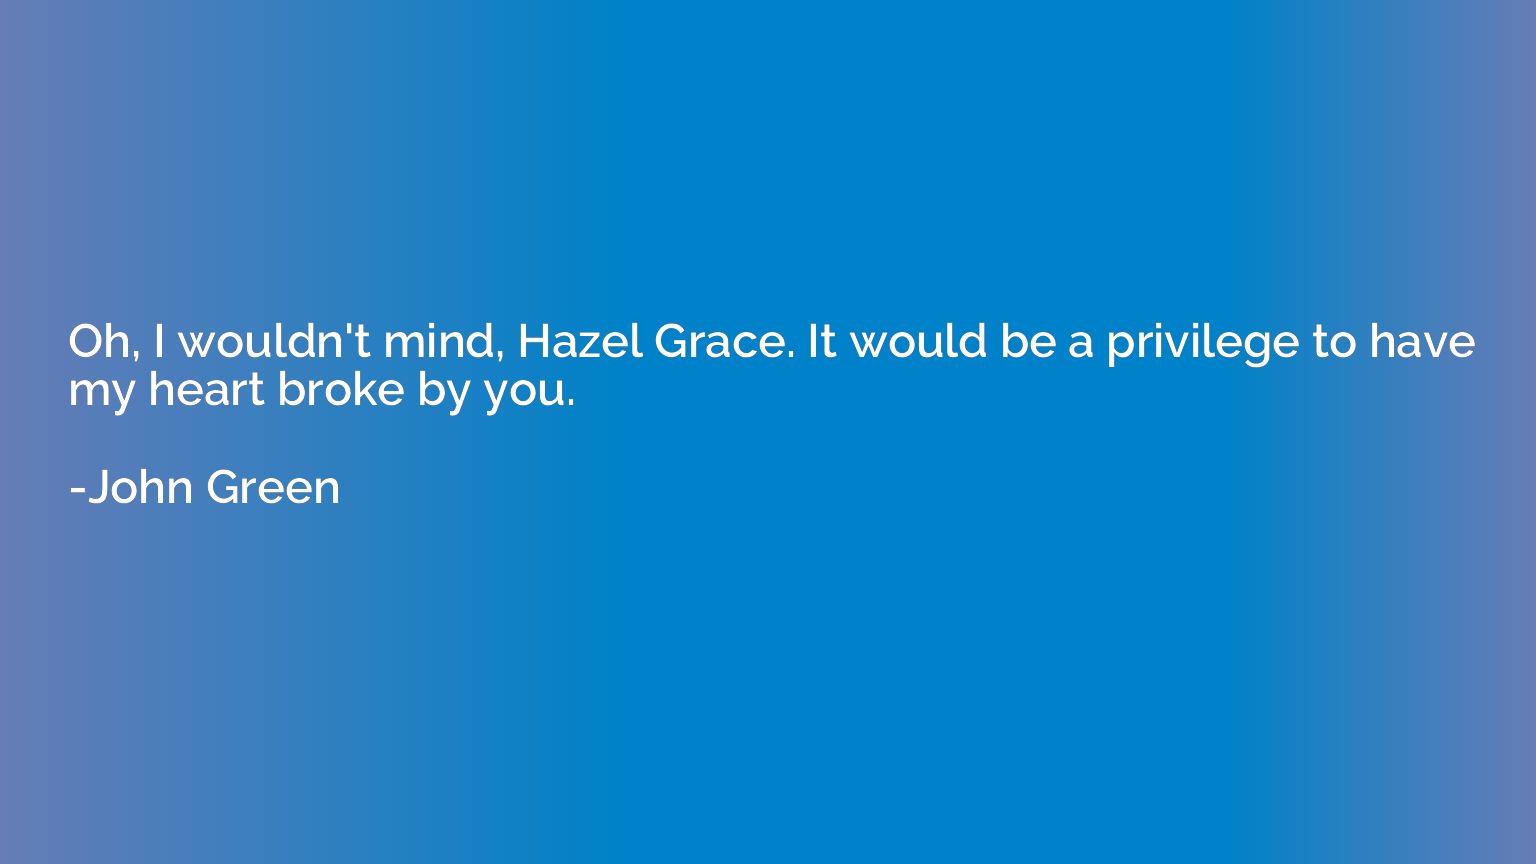 Oh, I wouldn't mind, Hazel Grace. It would be a privilege to